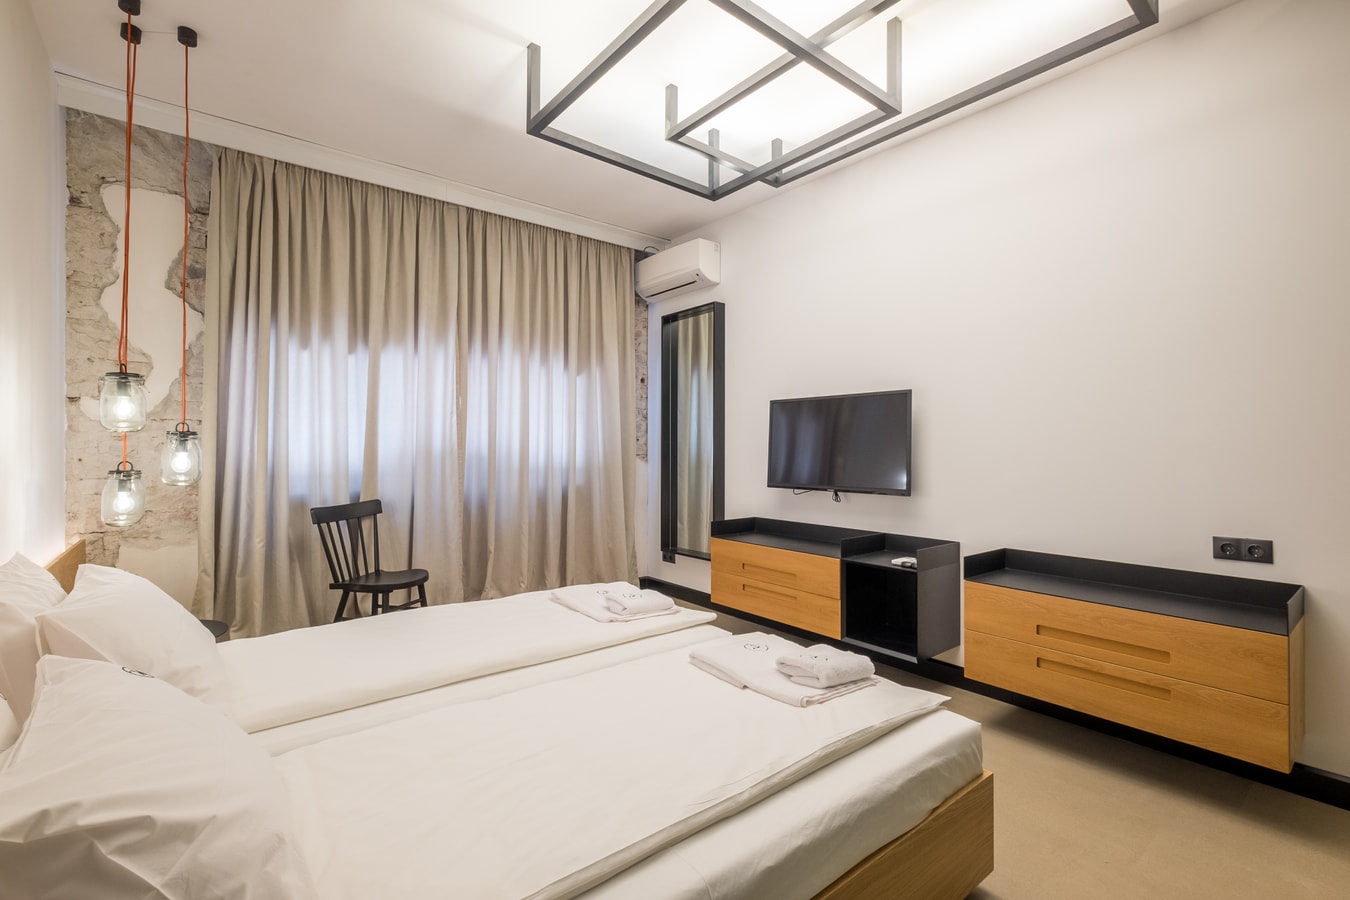 R34 Boutique Hotel - Deluxe Double Room №4 Flataway